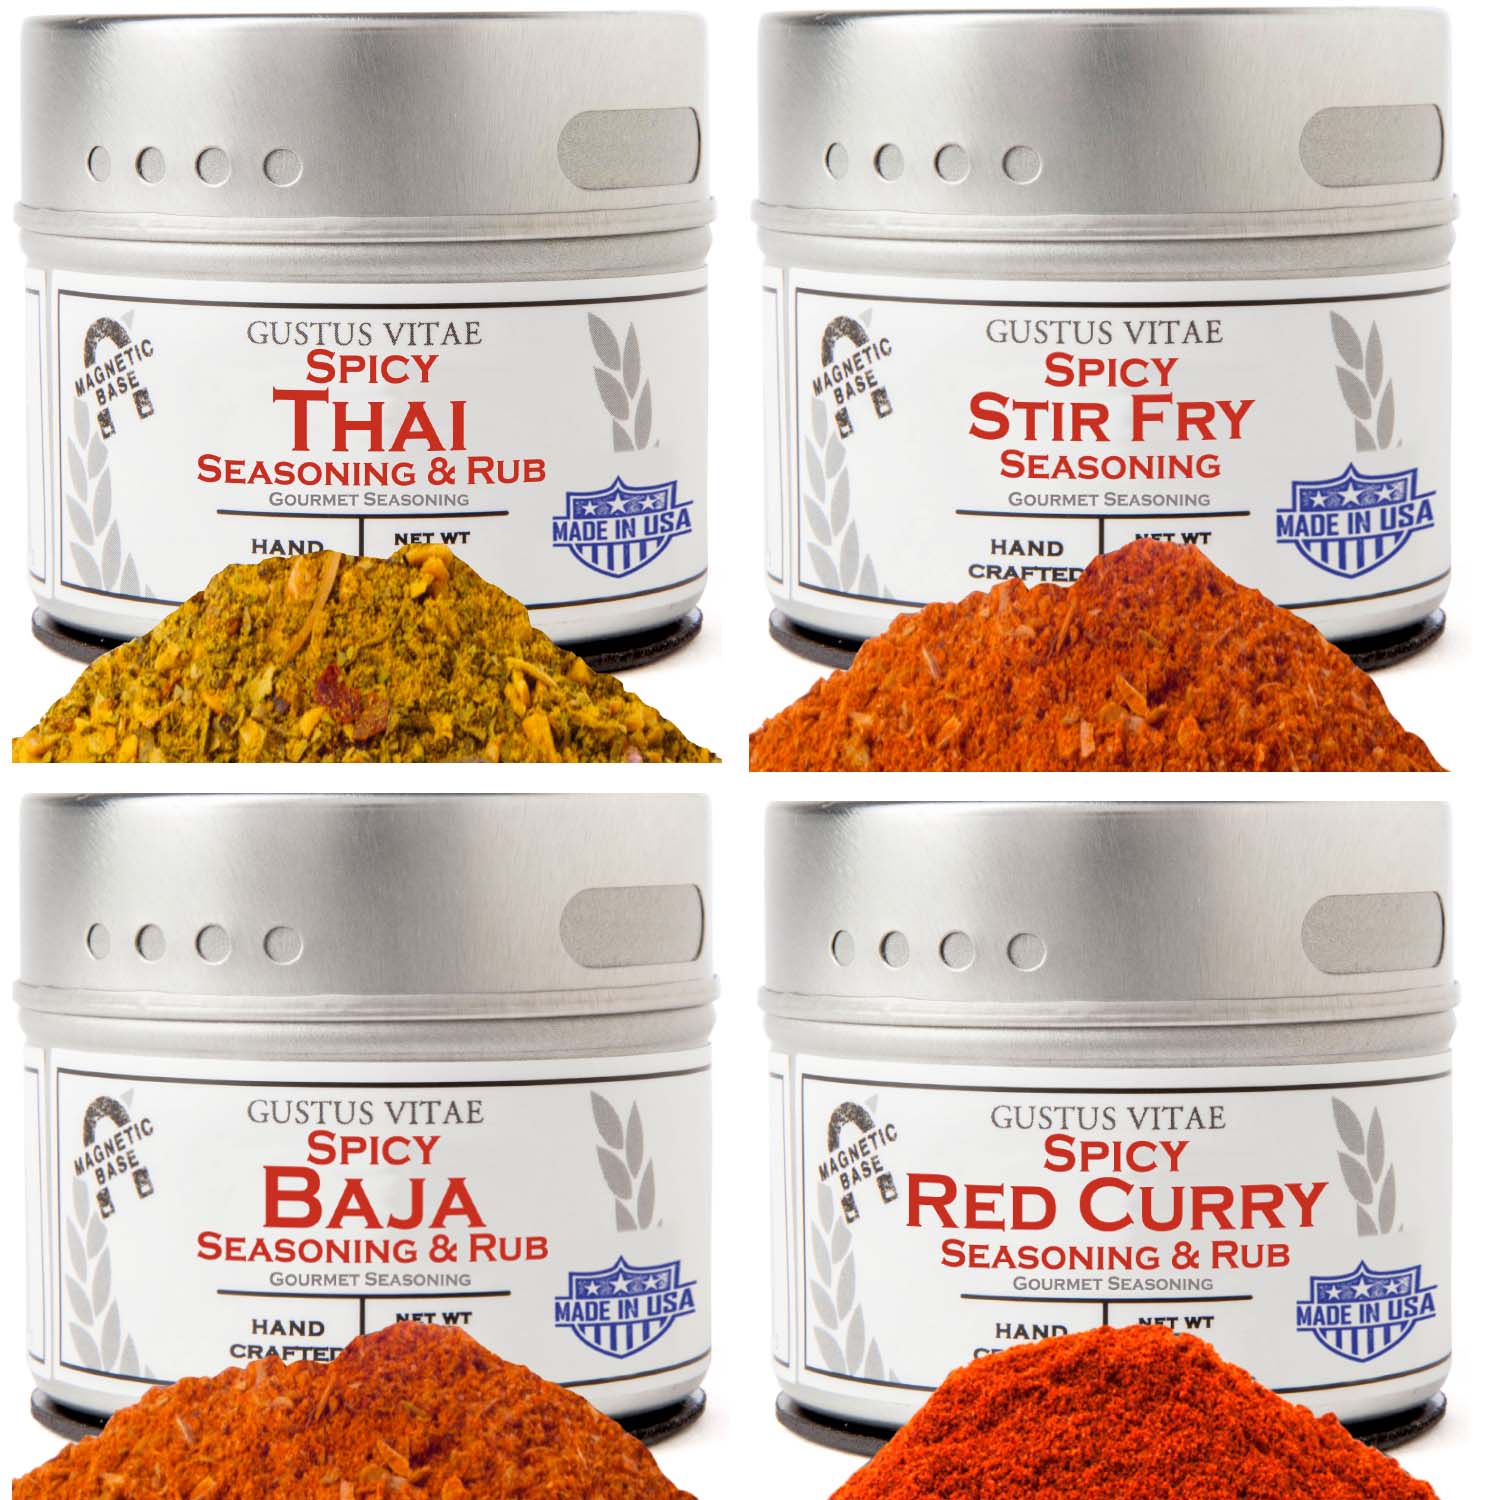 Spicy One Pot Wonders | Complete 4 Pack Collection | Authentic Gourmet Seasonings and Spice Blends by Gustus Vitae